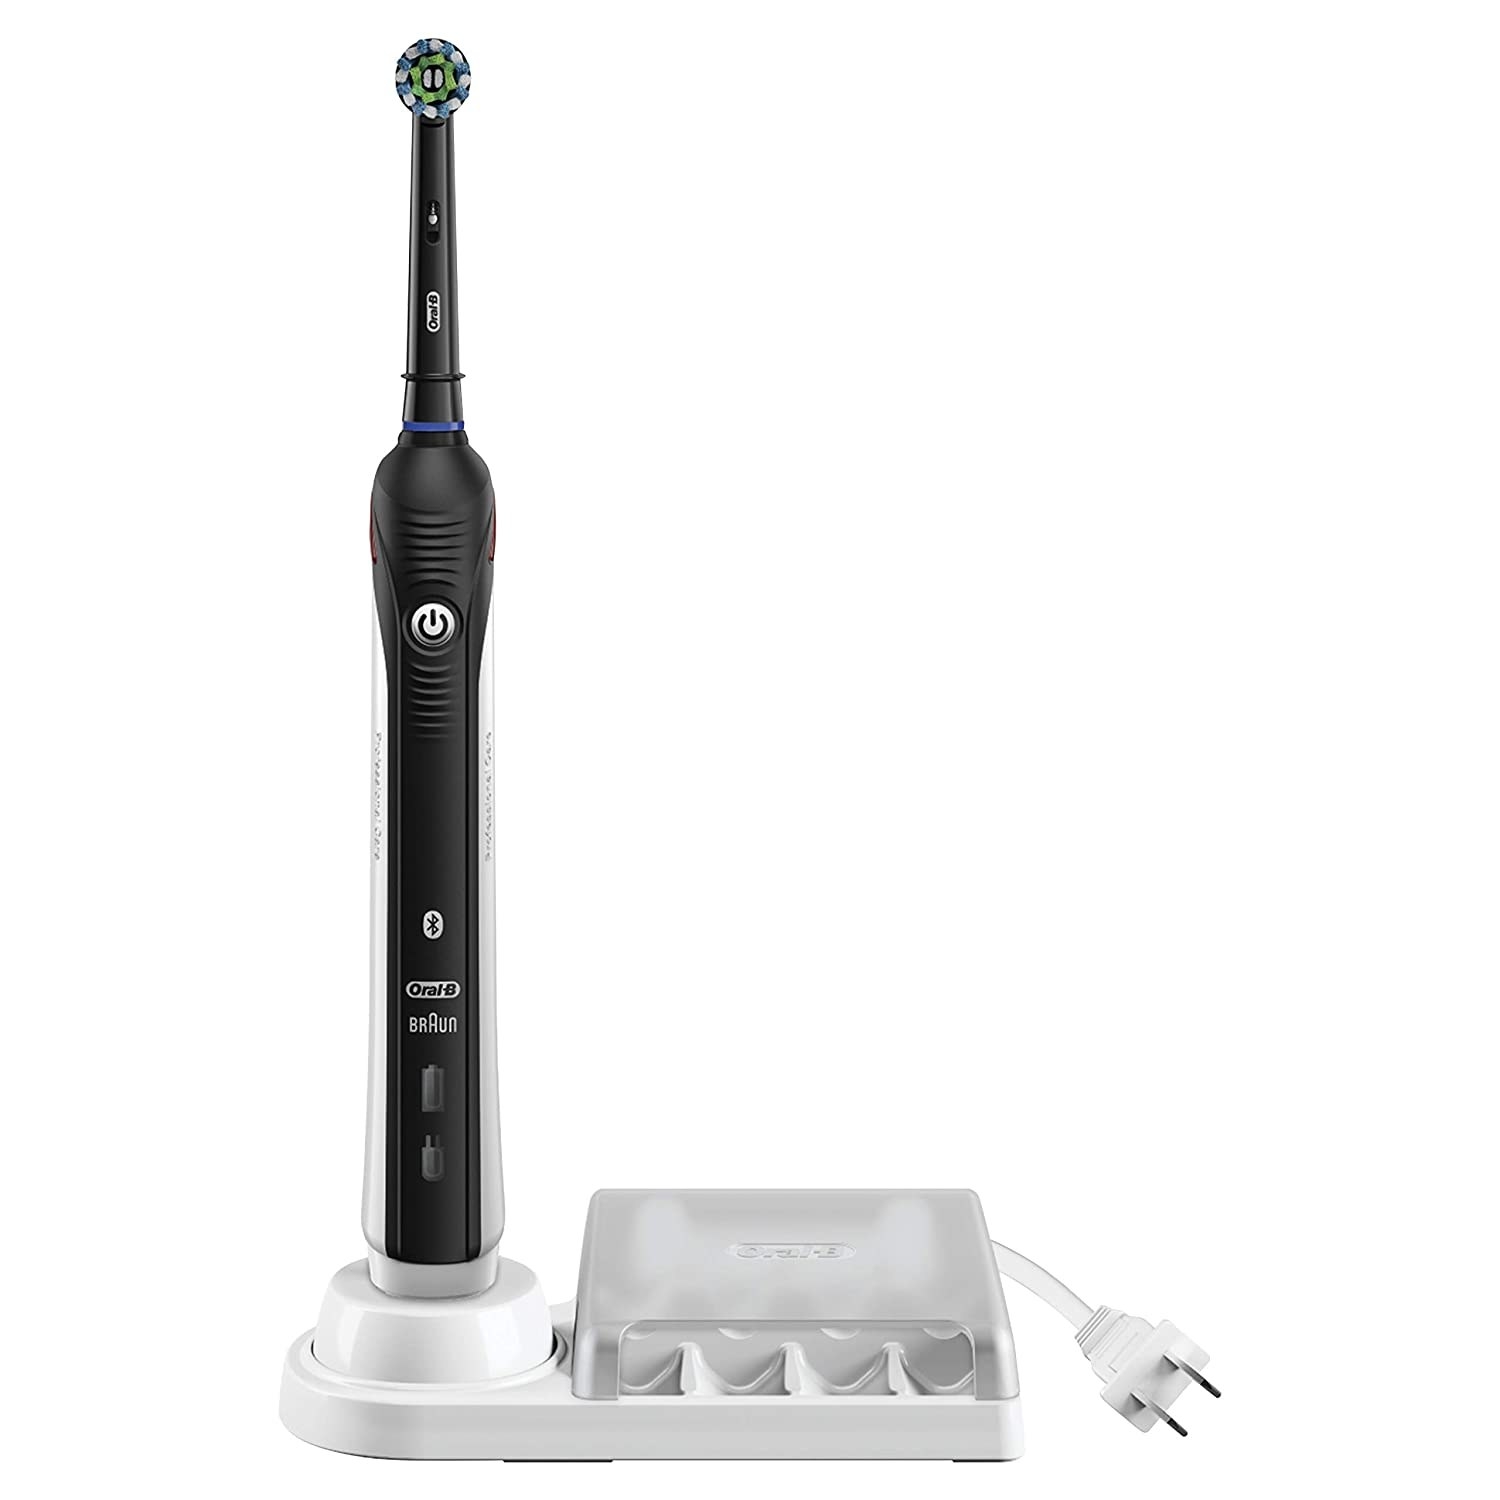 Black and white electric toothbrush standing on white base with power cord